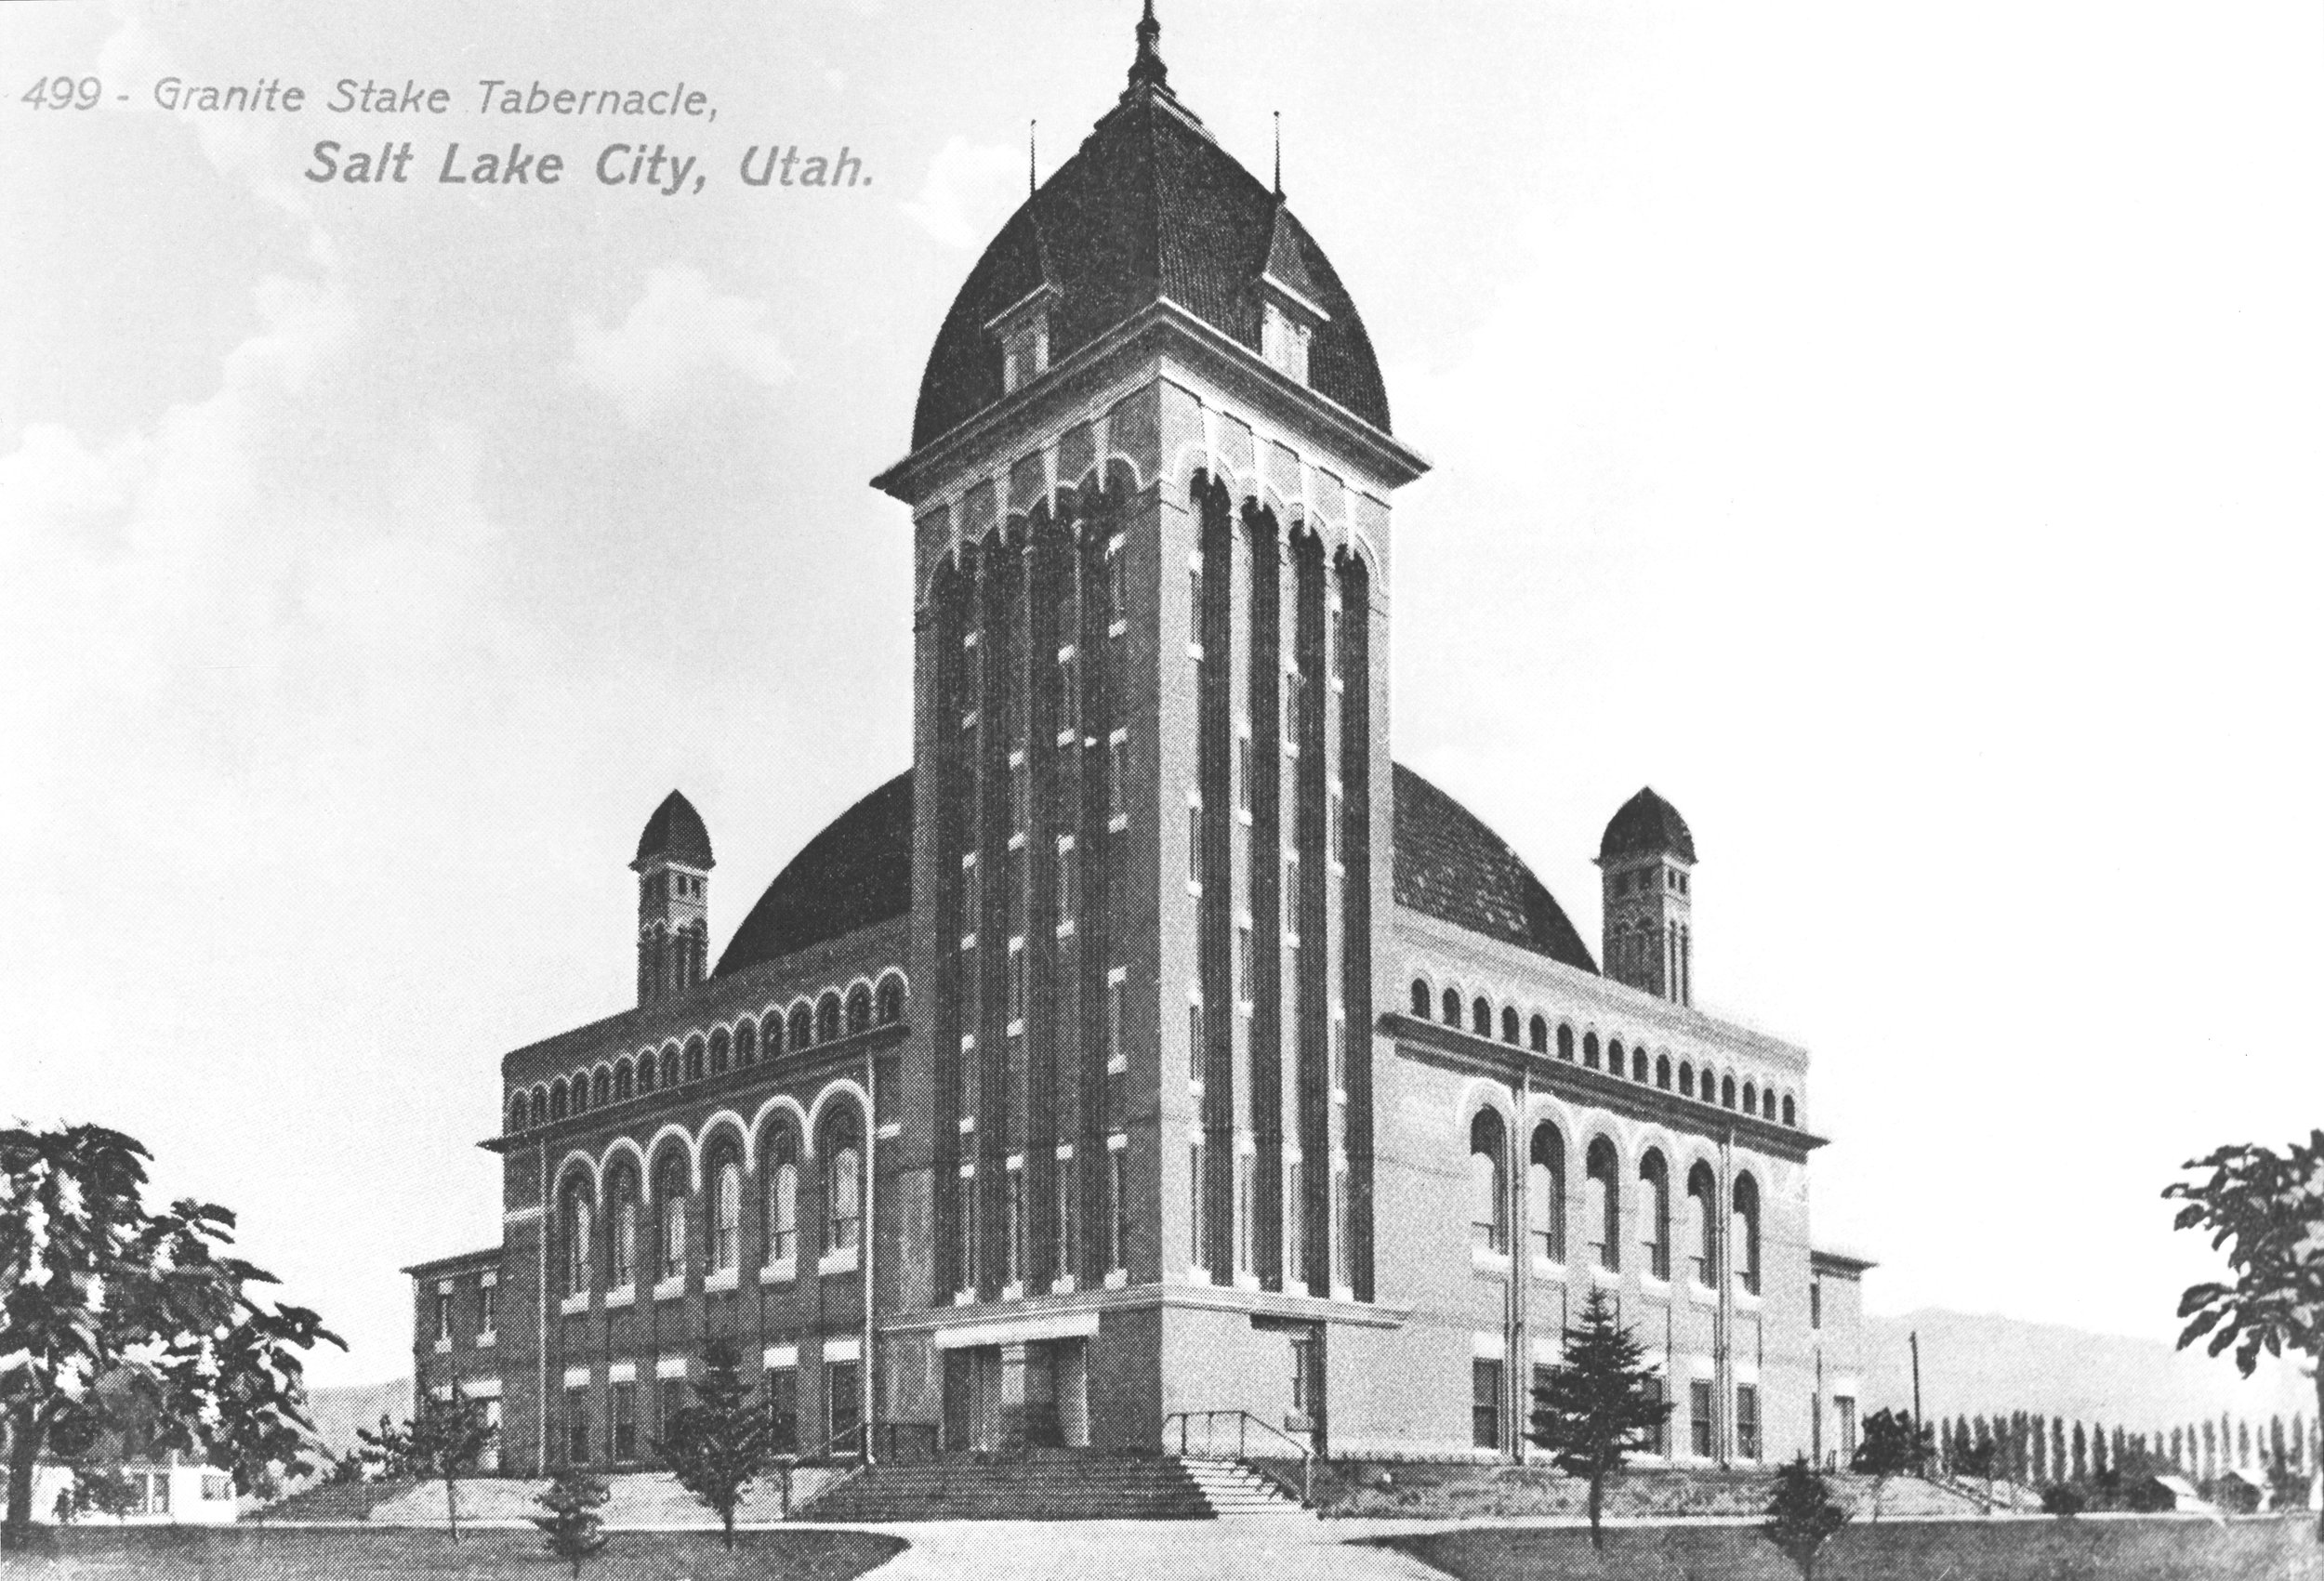 Granite Tabernacle, which once stood at 3300 S. State, where Century 16 Theatres are today.